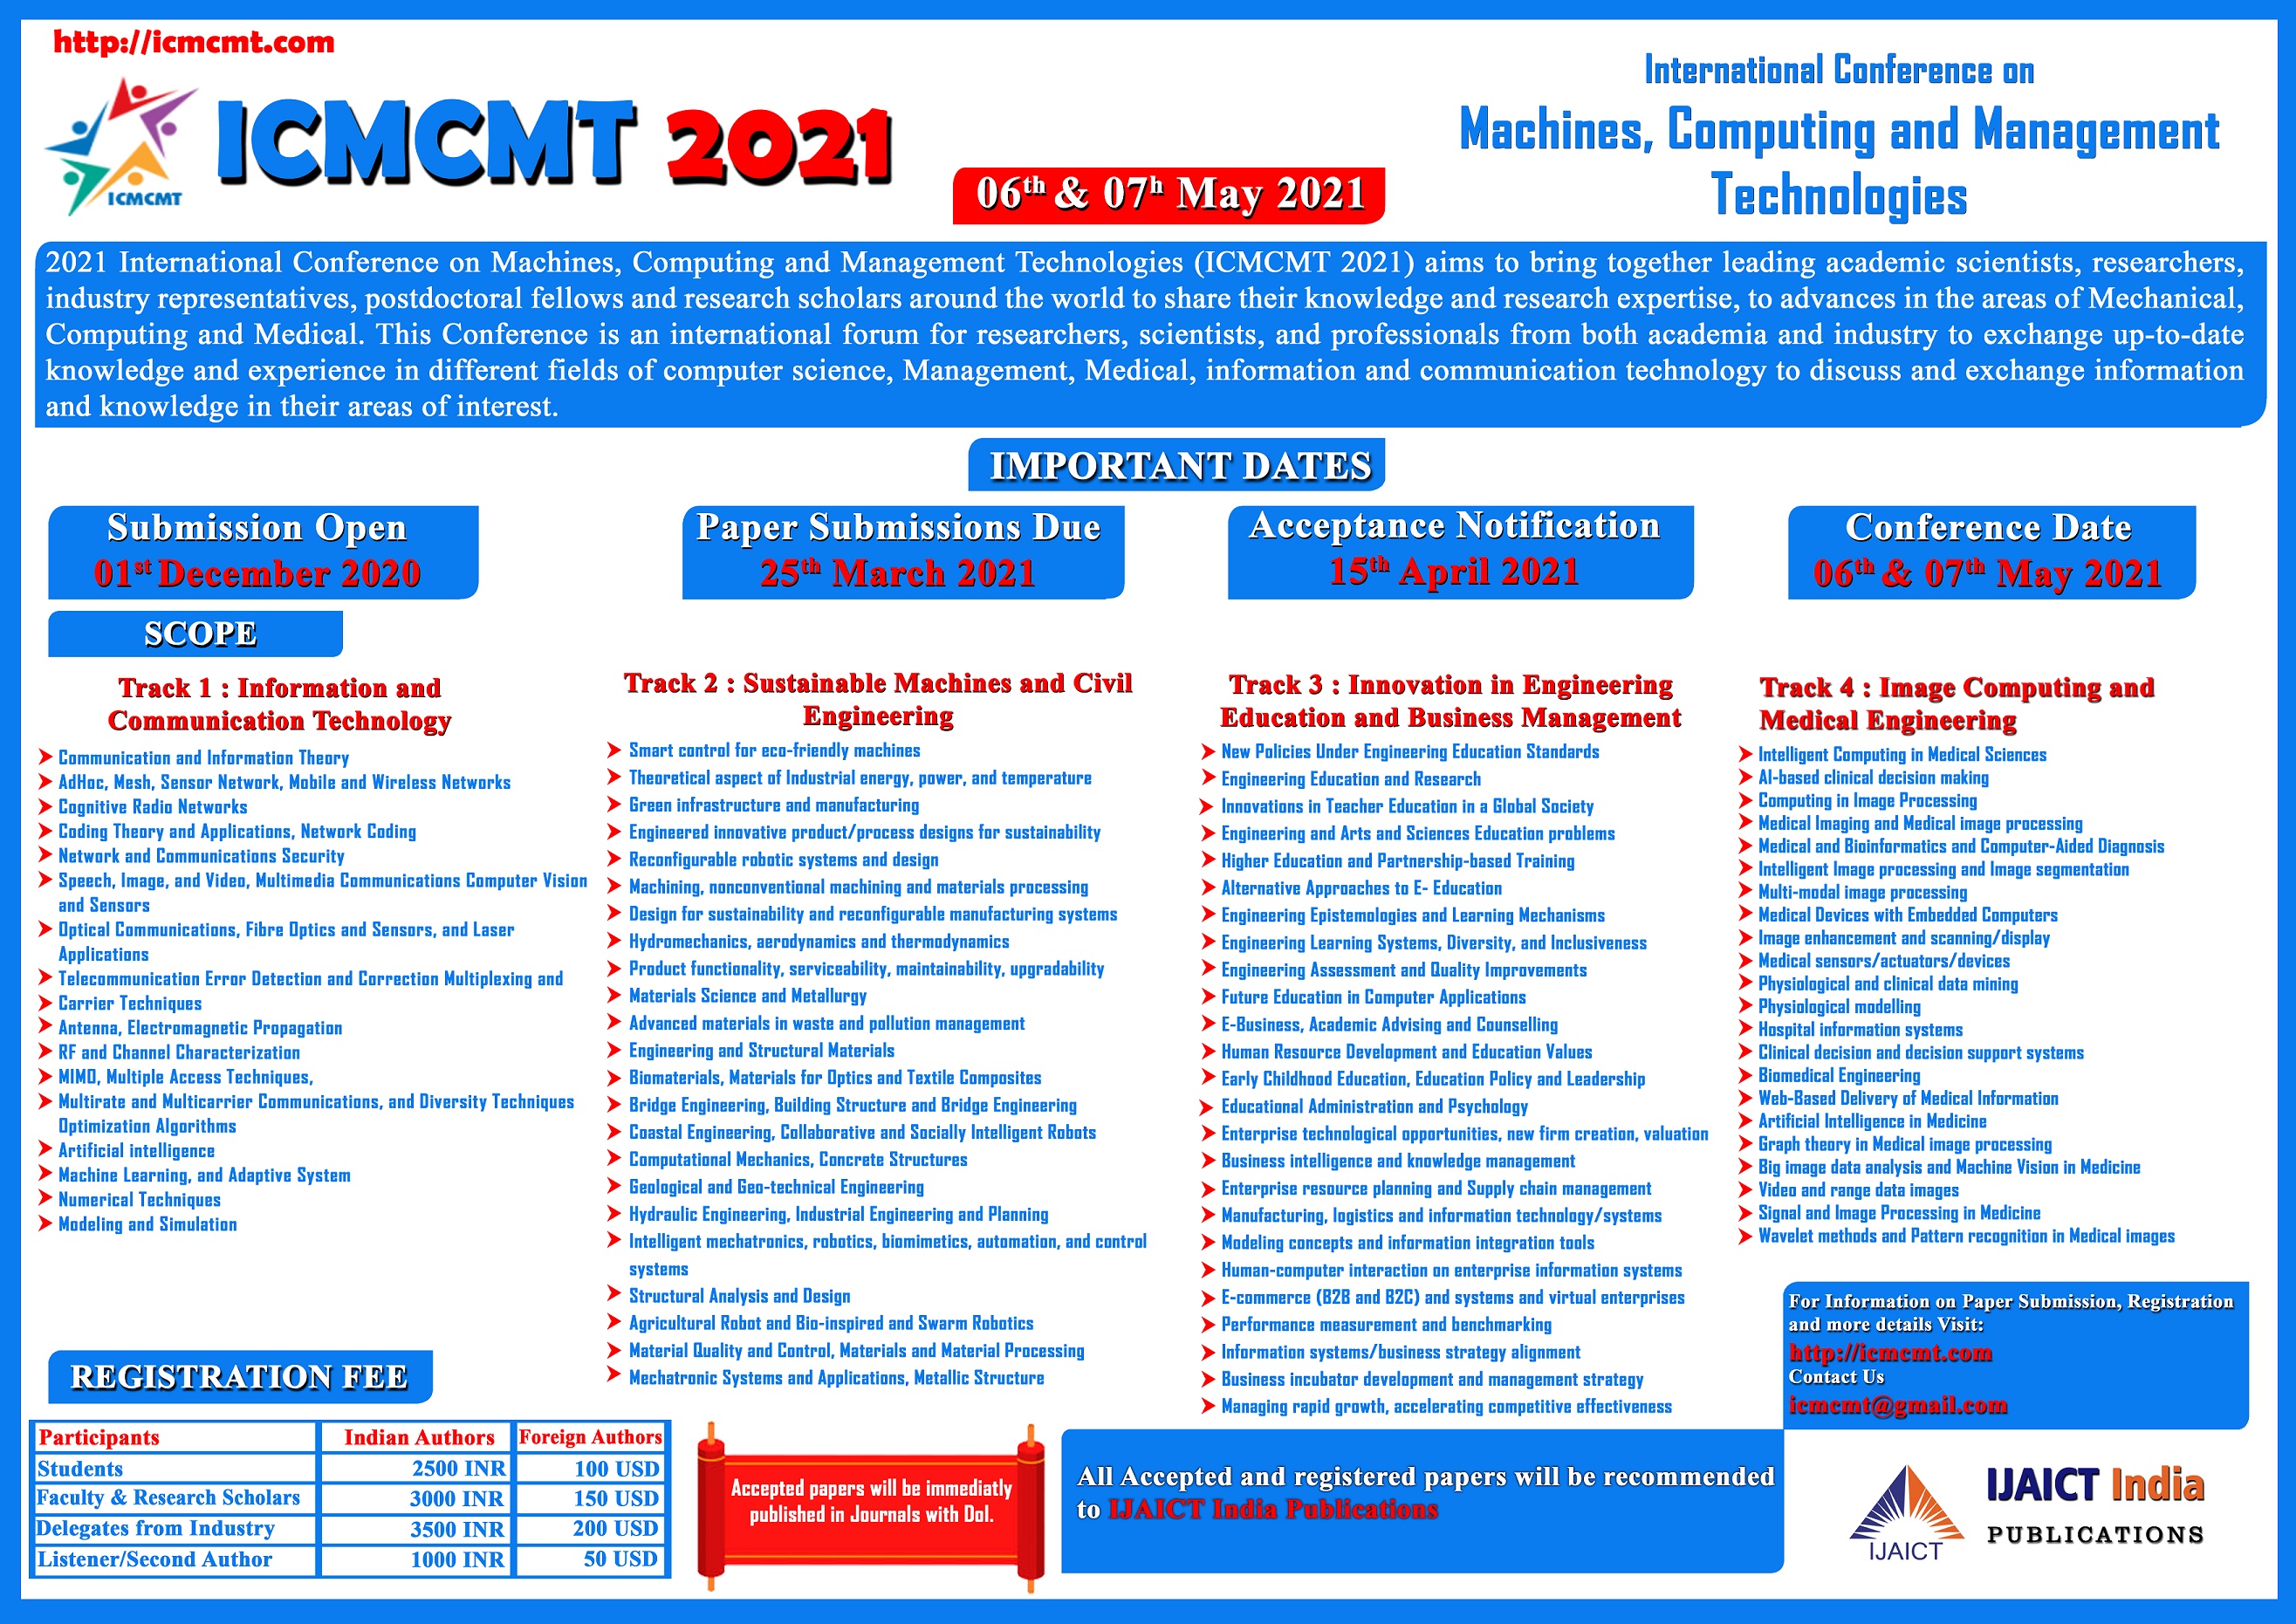 International Conference on Machines, Computing and Management Technologies (ICMCMT 2021), Coimbatore, Tamil Nadu, India